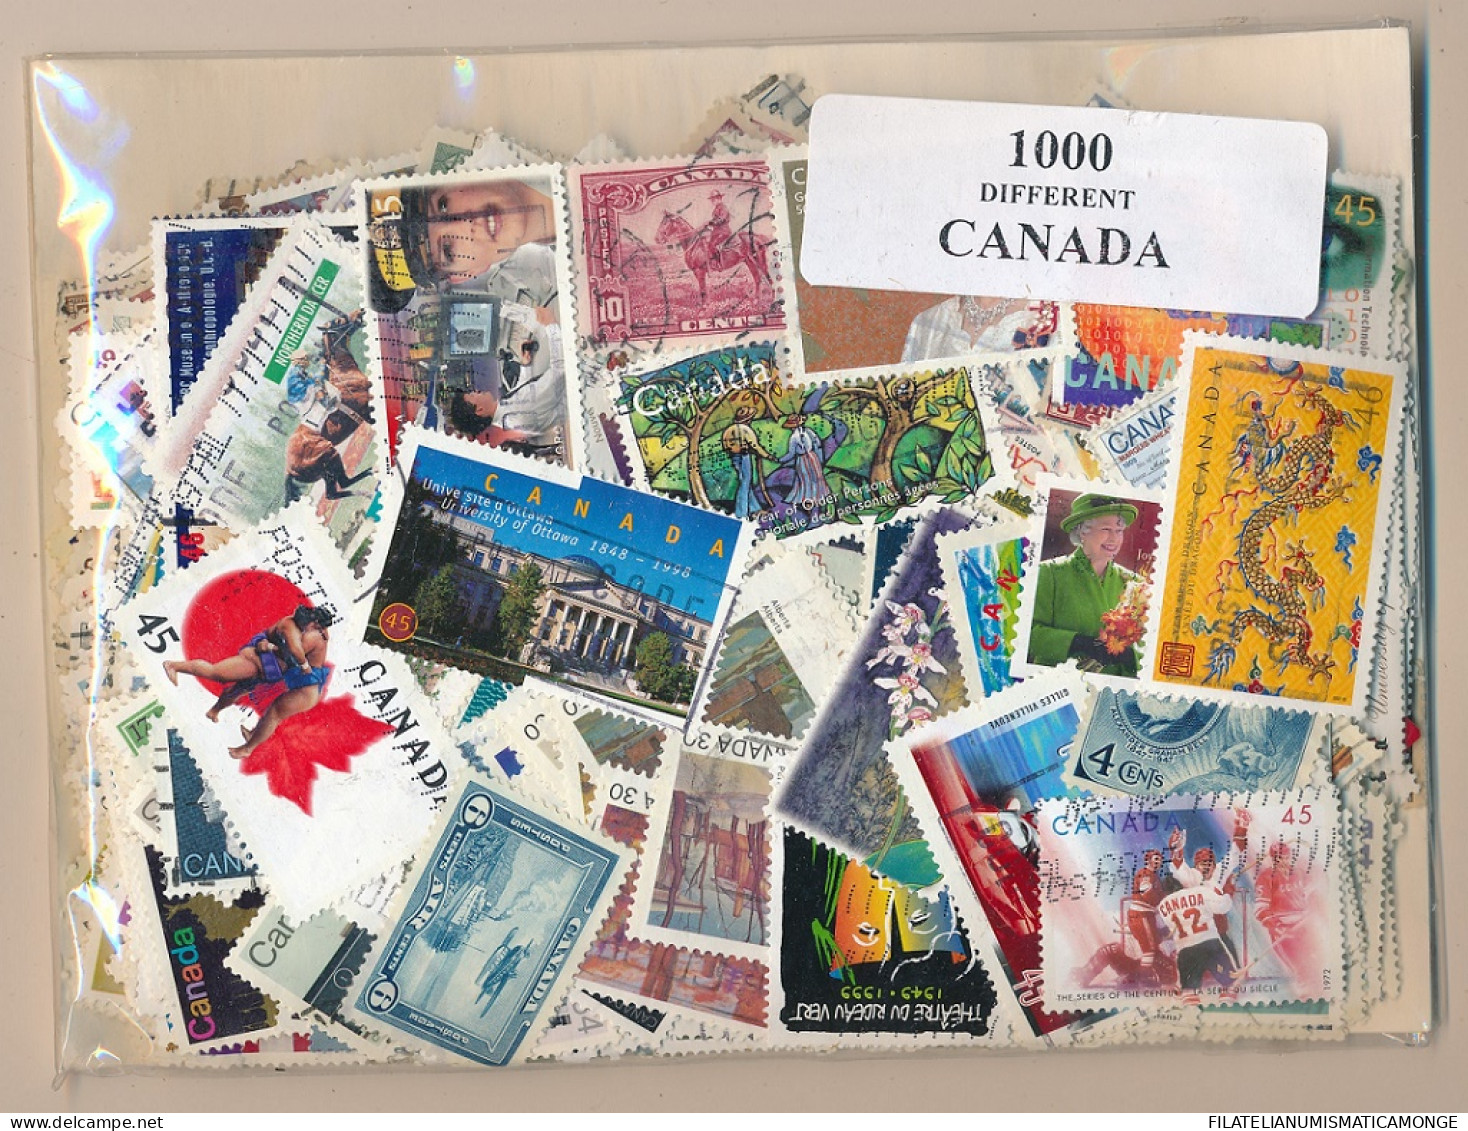  Offer - Lot Stamps - Paqueteria  Canadá 1000 Sellos Diferentes           - Lots & Kiloware (mixtures) - Min. 1000 Stamps